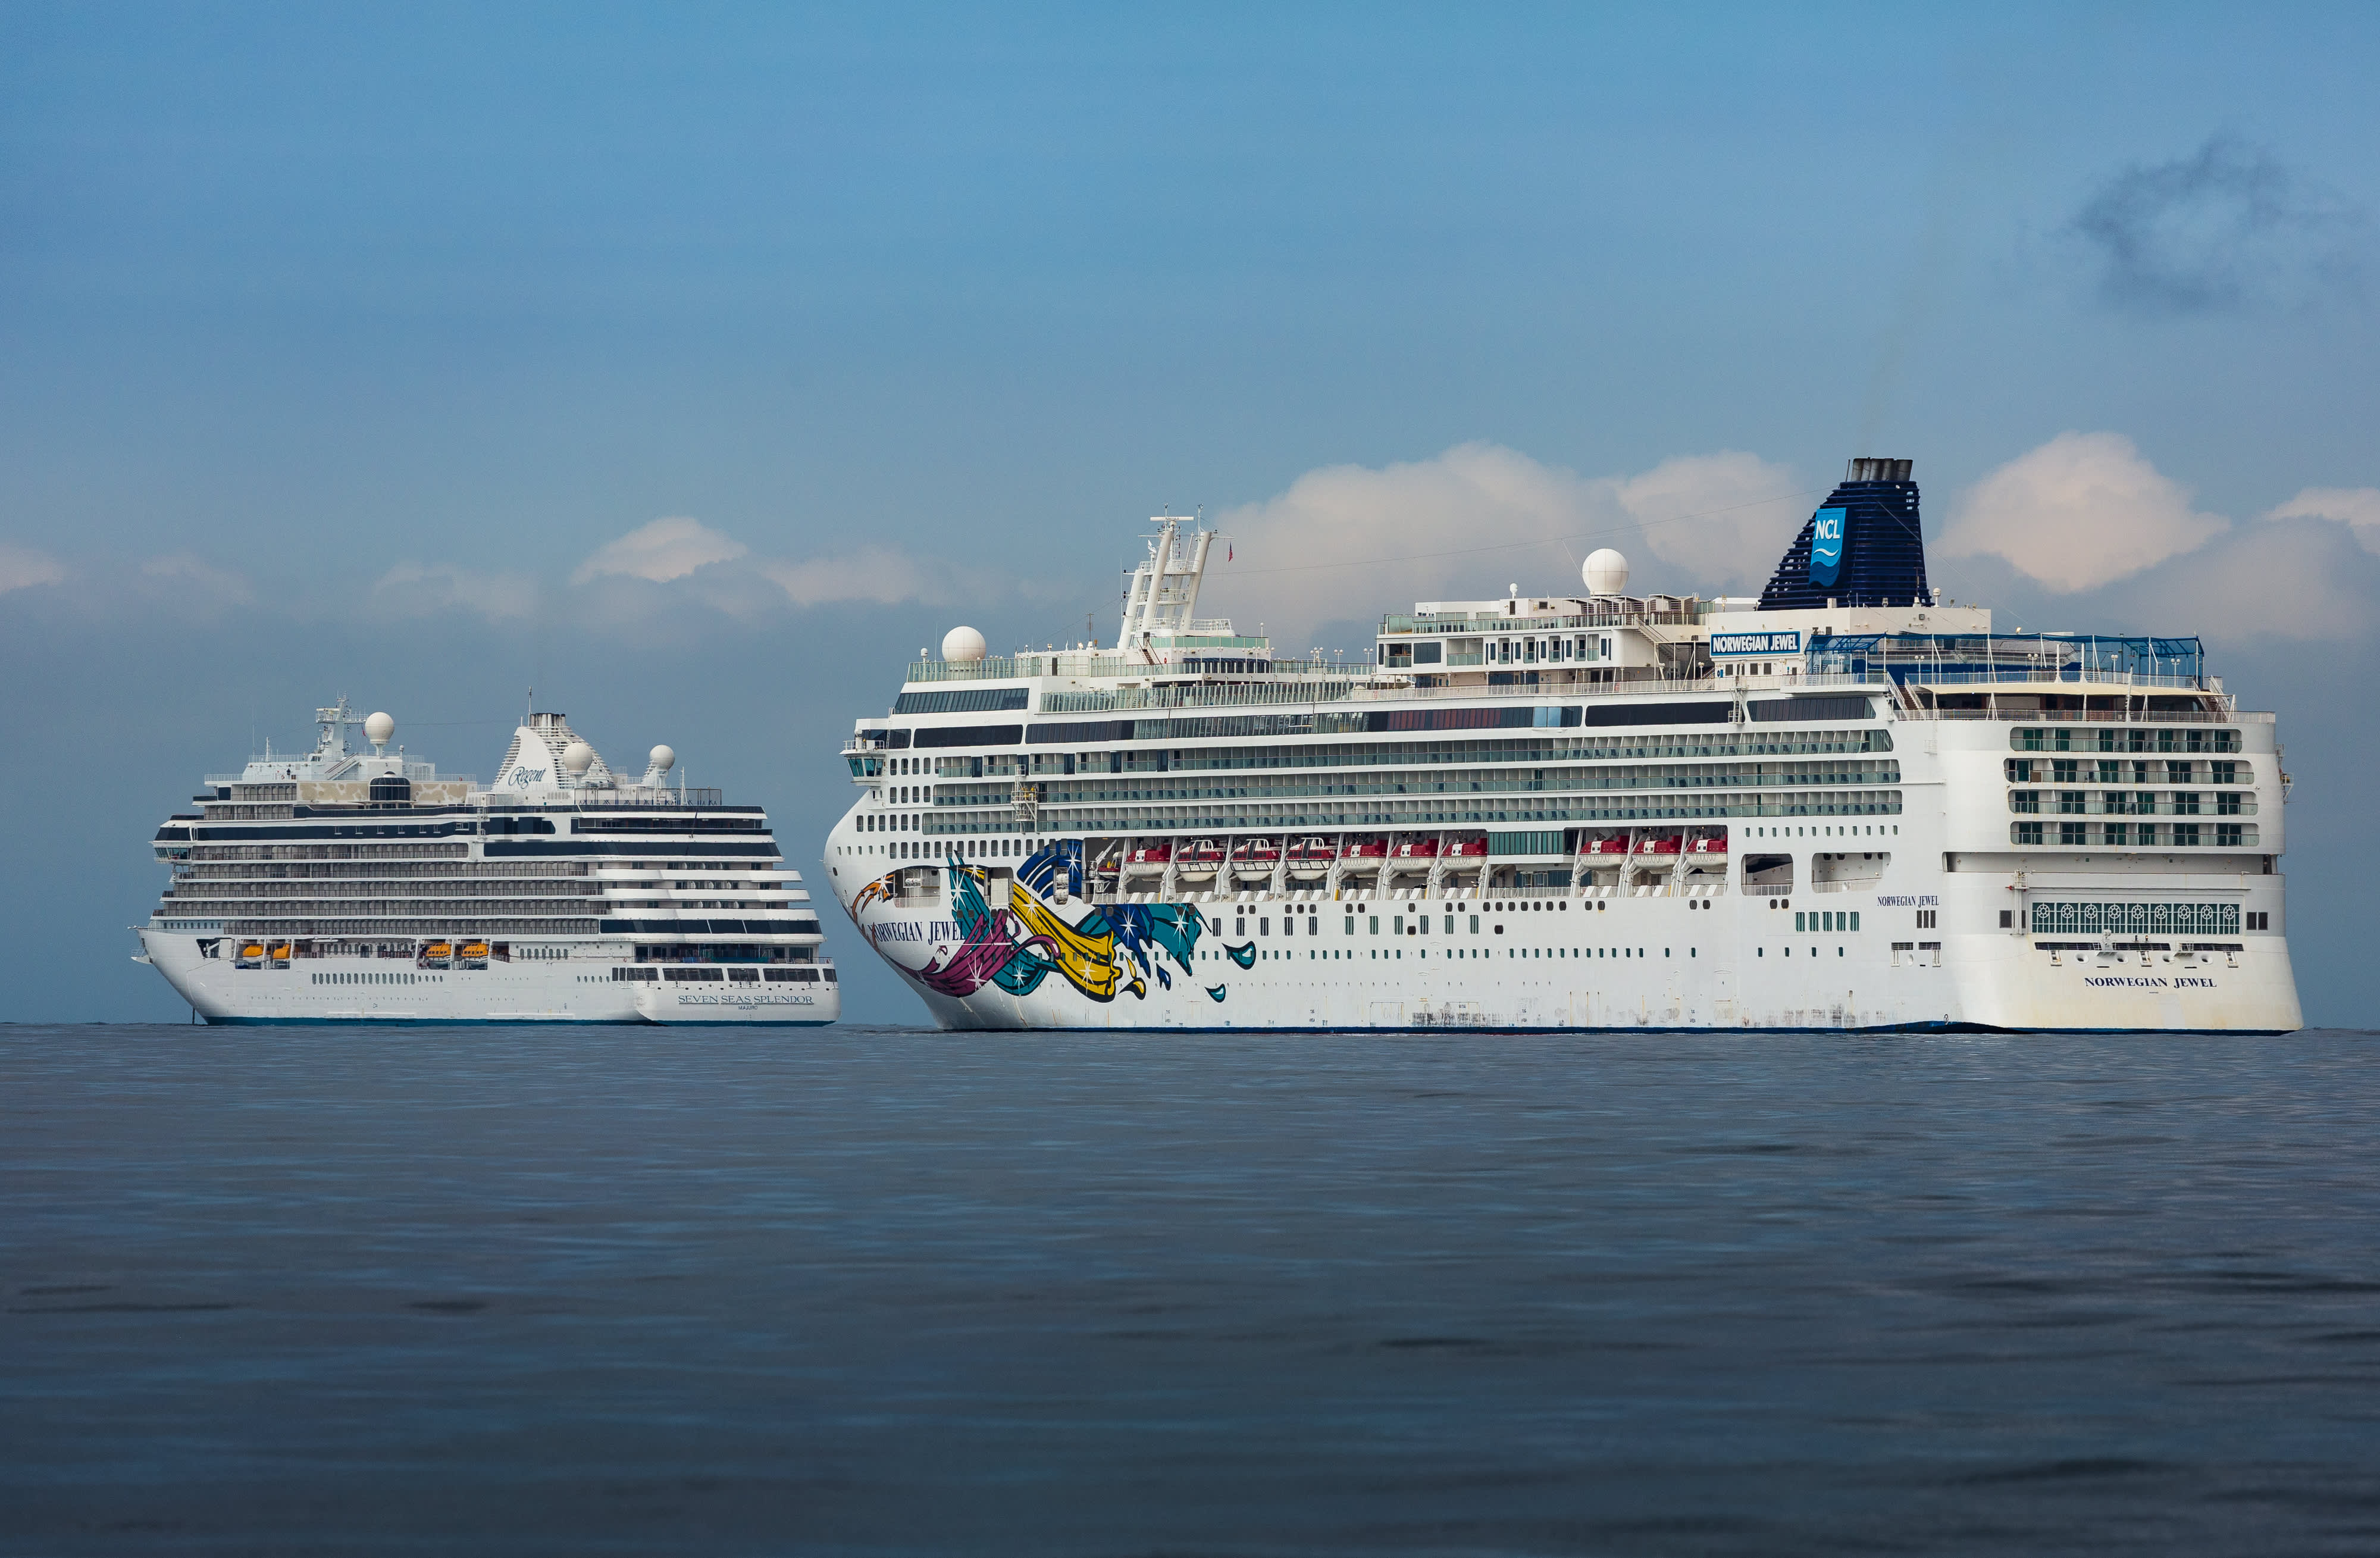 Norwegian Cruise Line Director on how the company’s cruise ships can sail safely once again